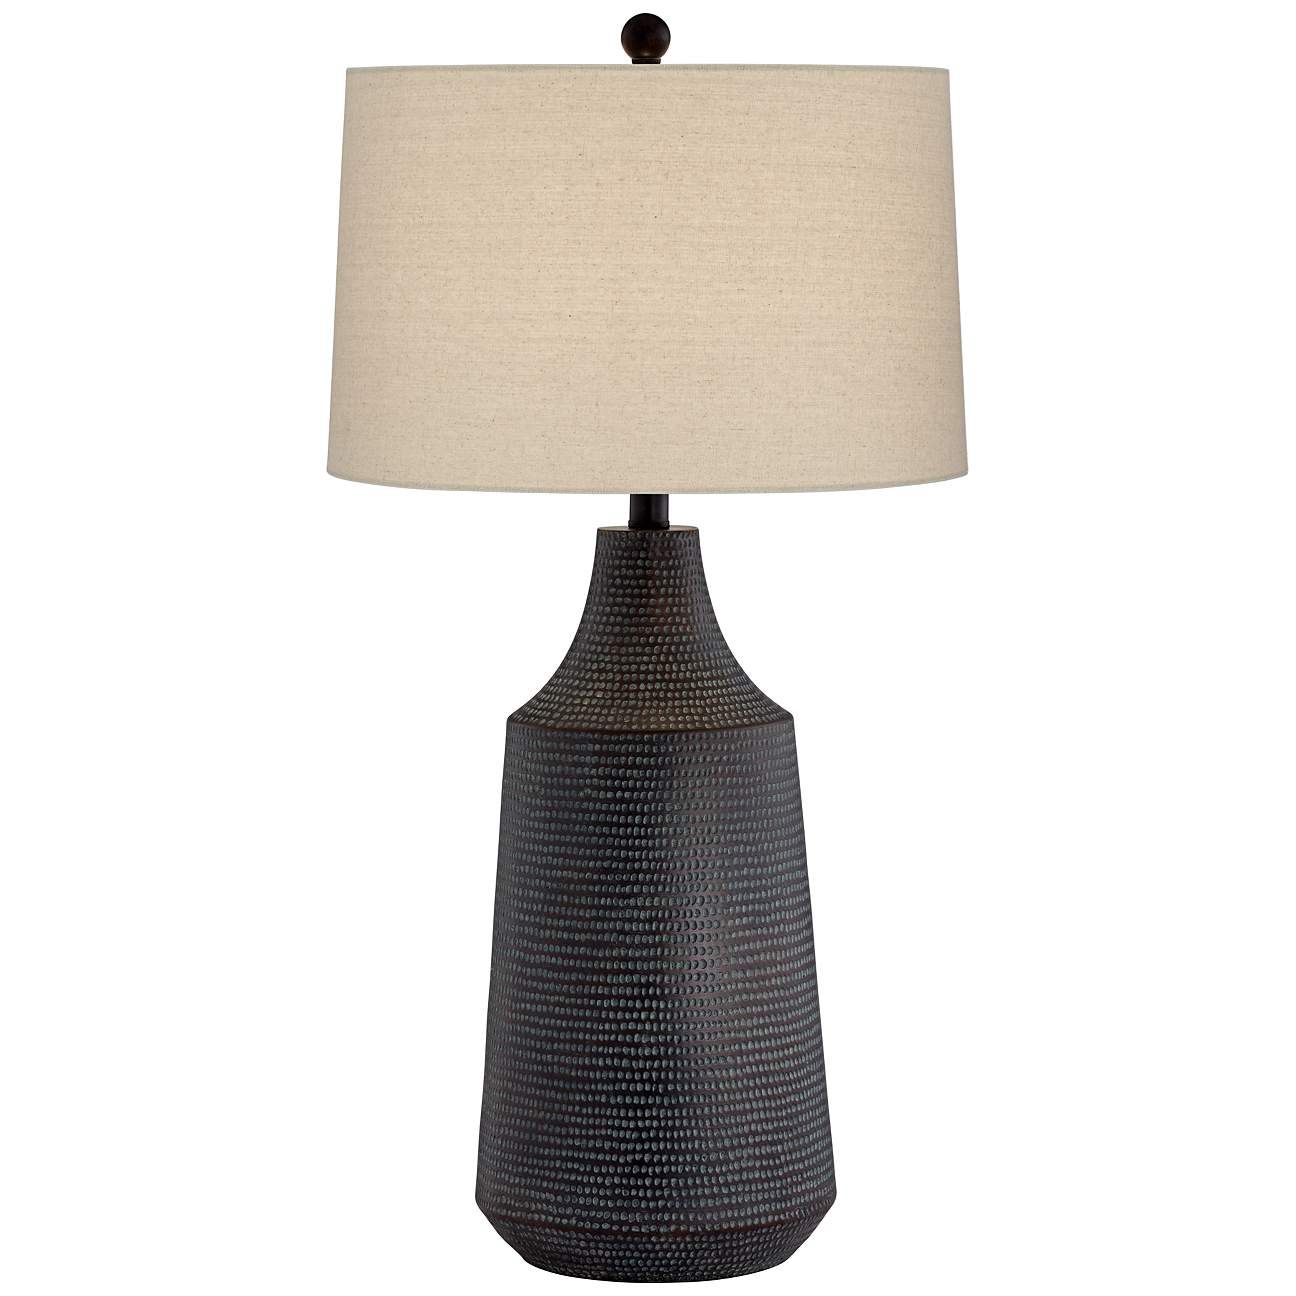 Rocco Black Hammered Jar Table Lamp | Lamps Plus